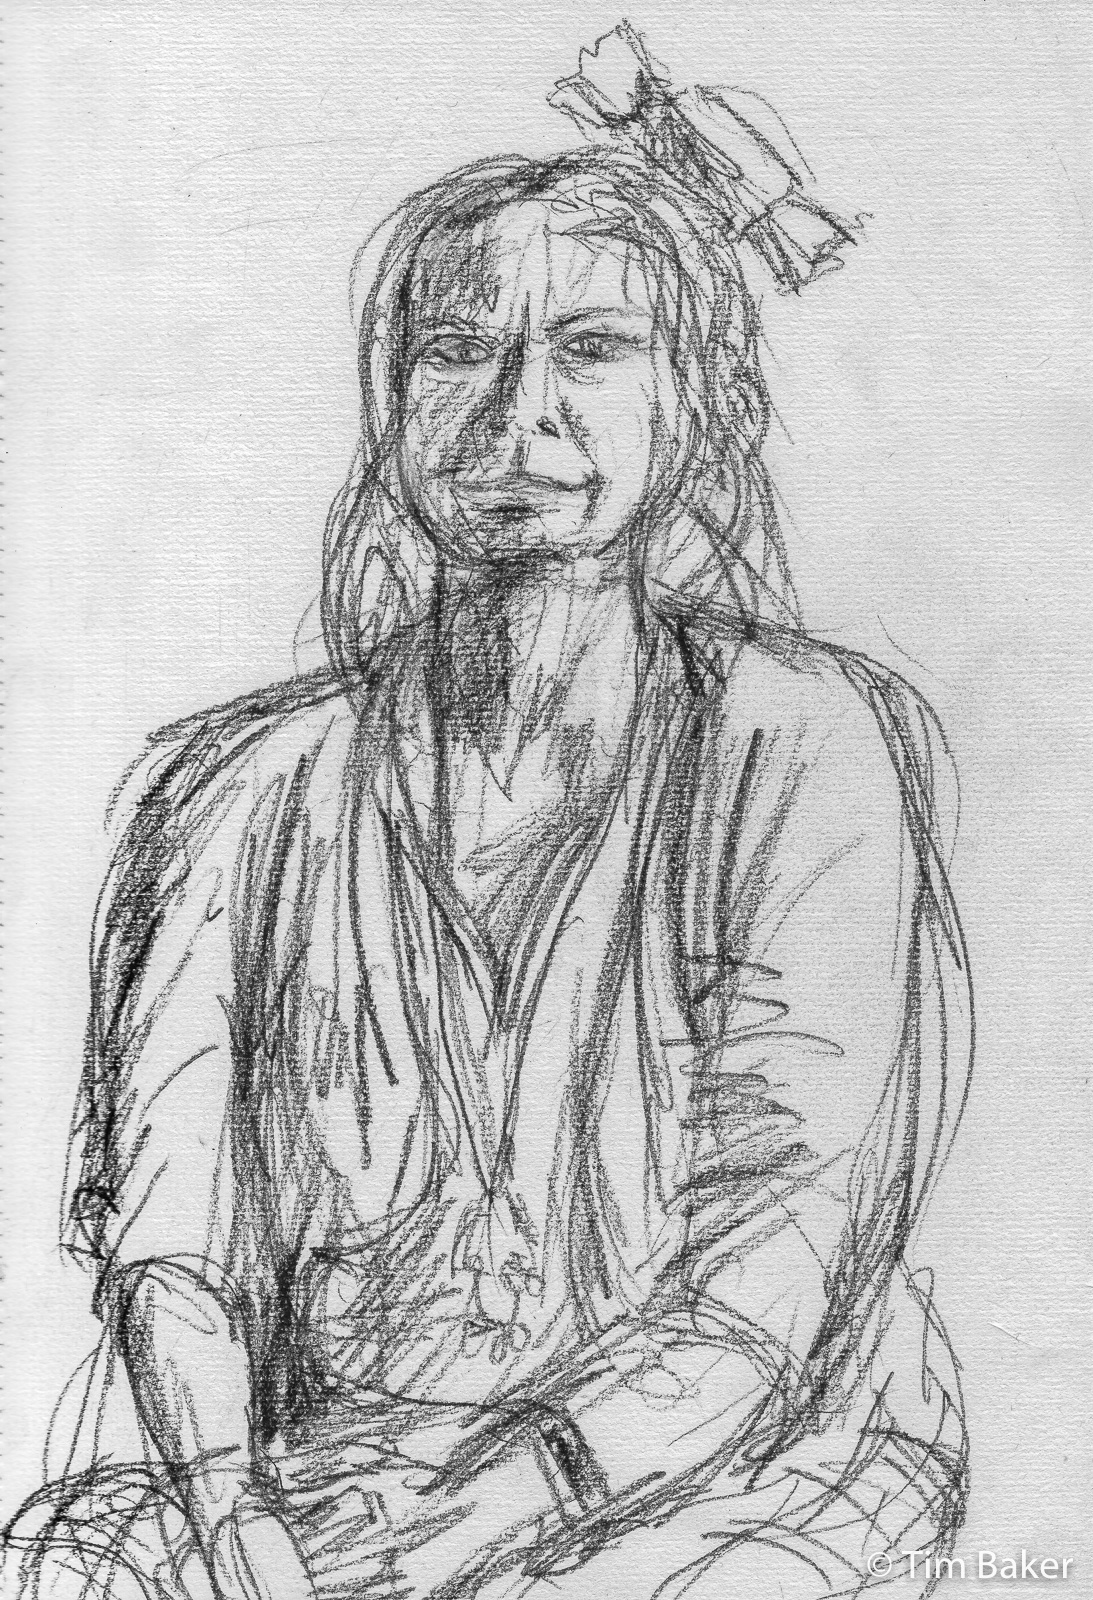 Aniela,Portraits at the Pub 5, Woodless charcoal on A4 paper.